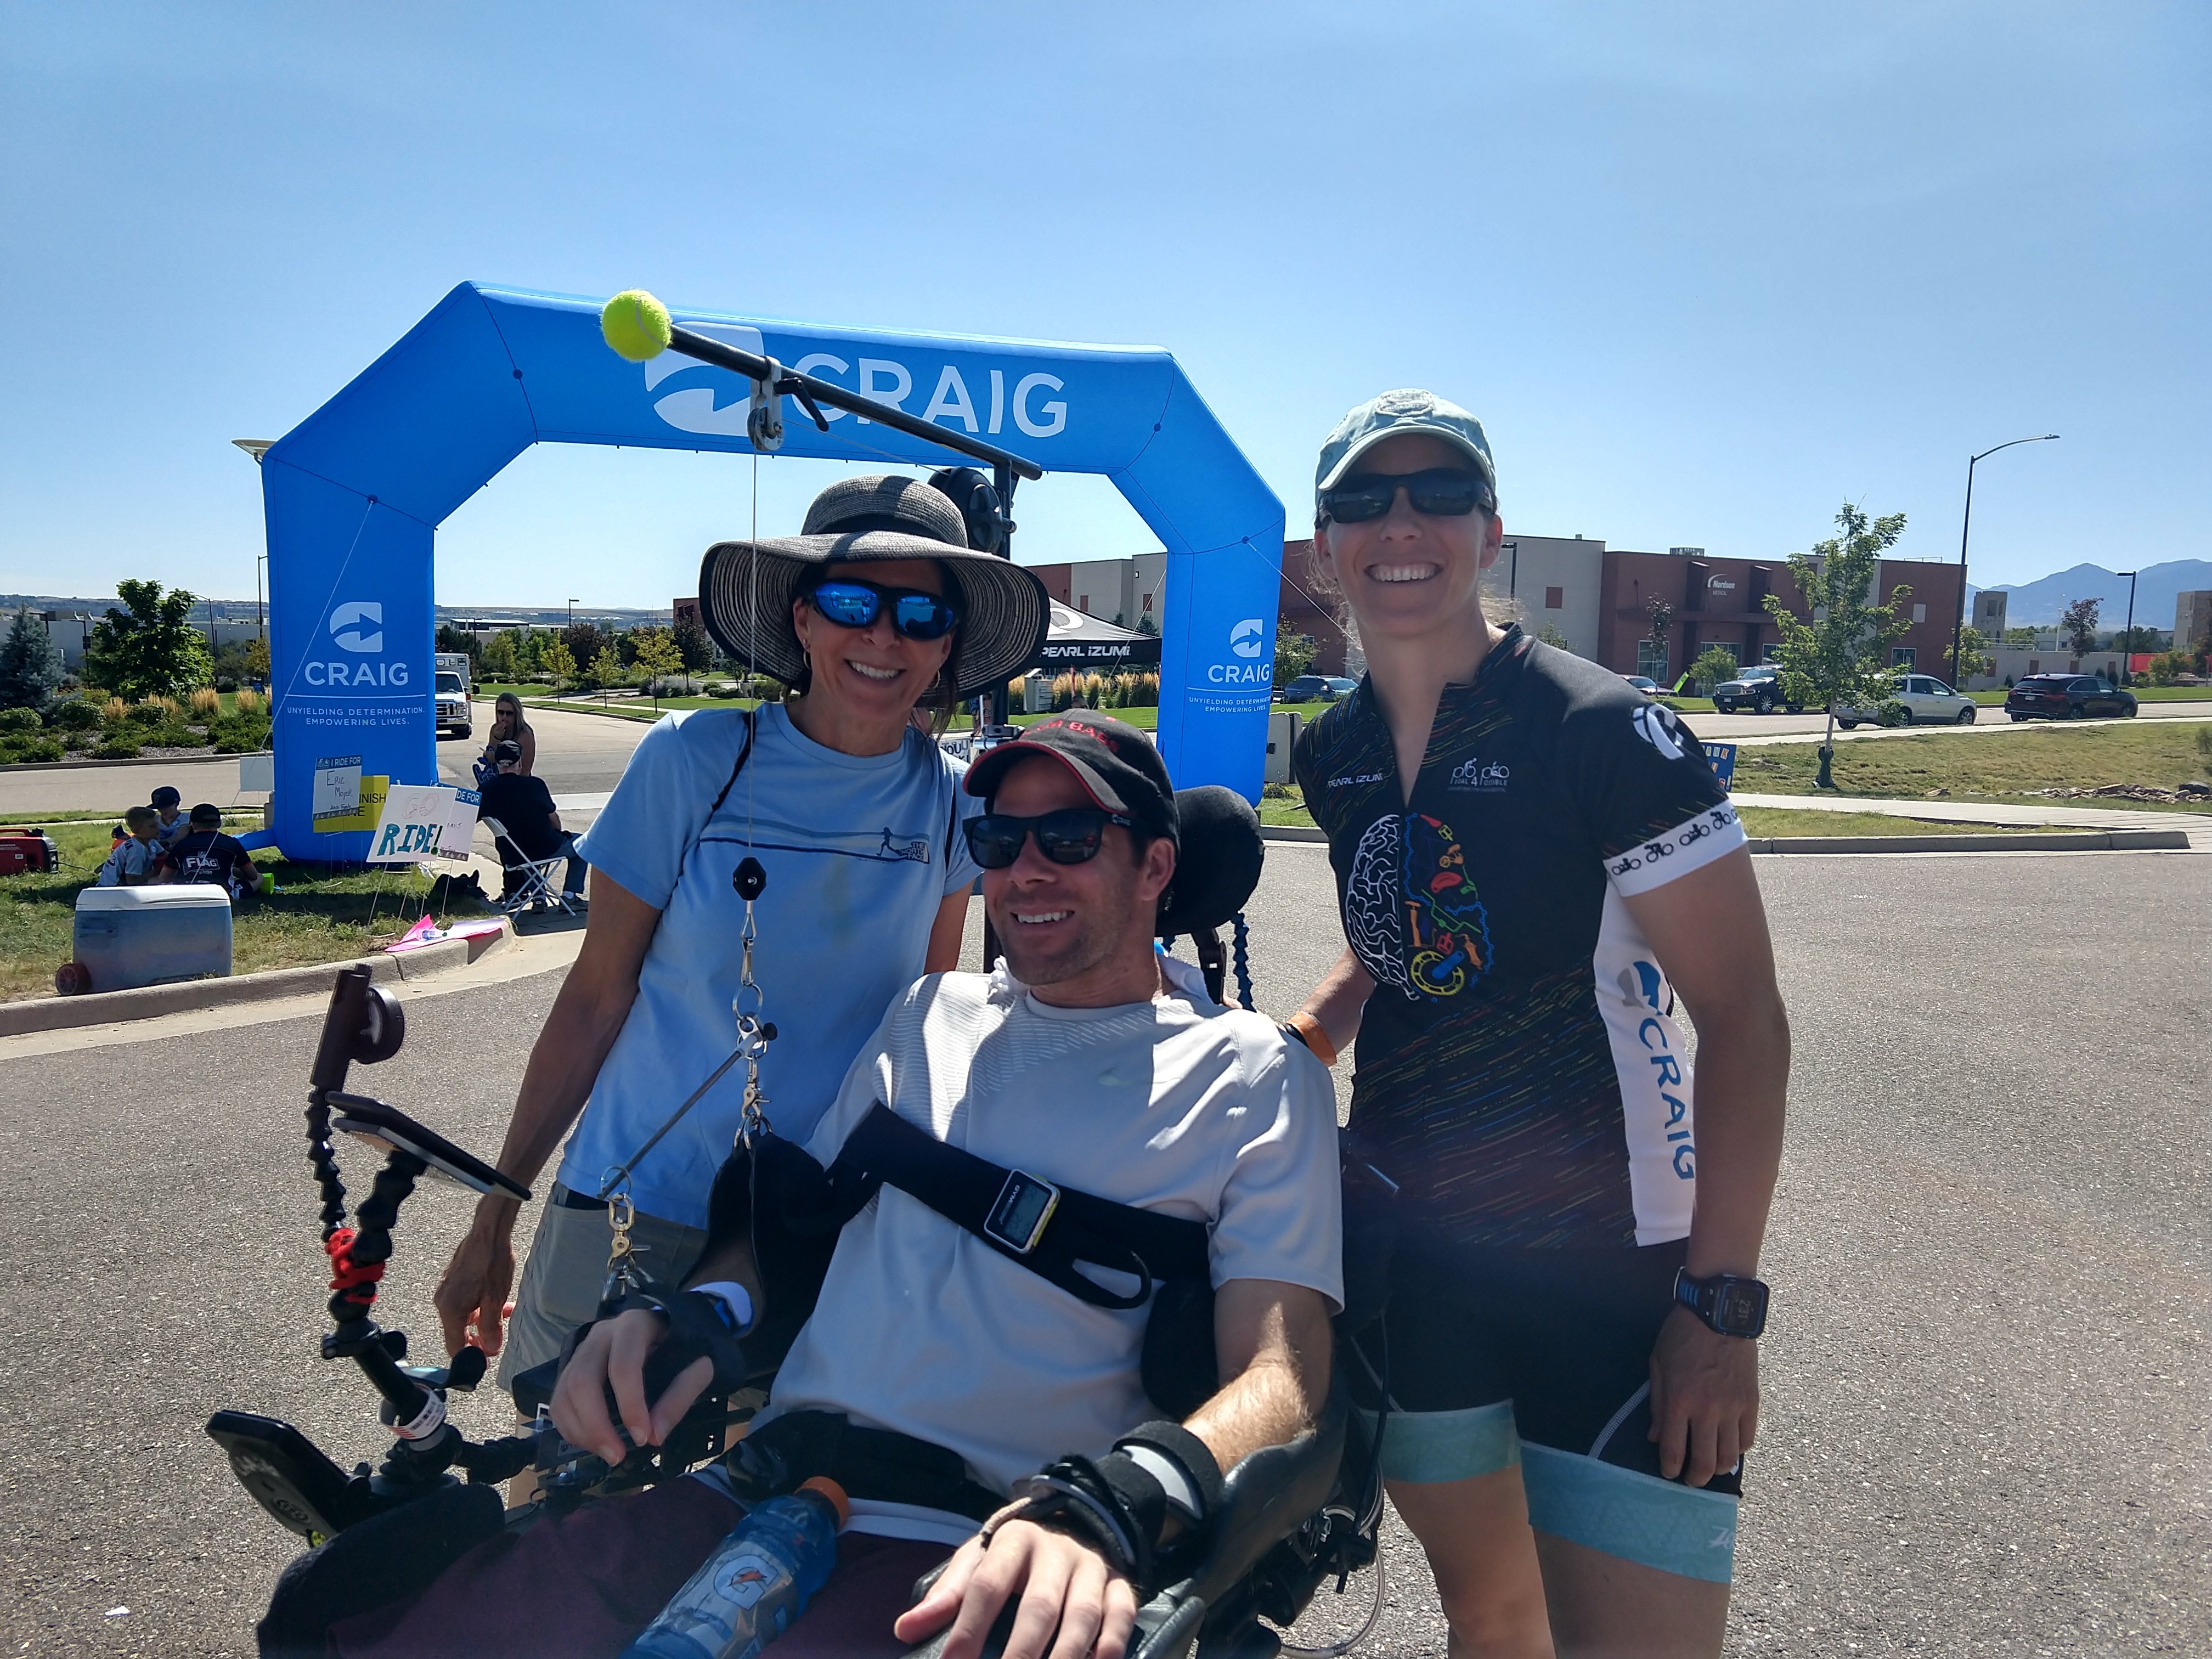 smiling family of three at the end of a bike race with daughter wearing cycling attire and son in an electronic wheelchair